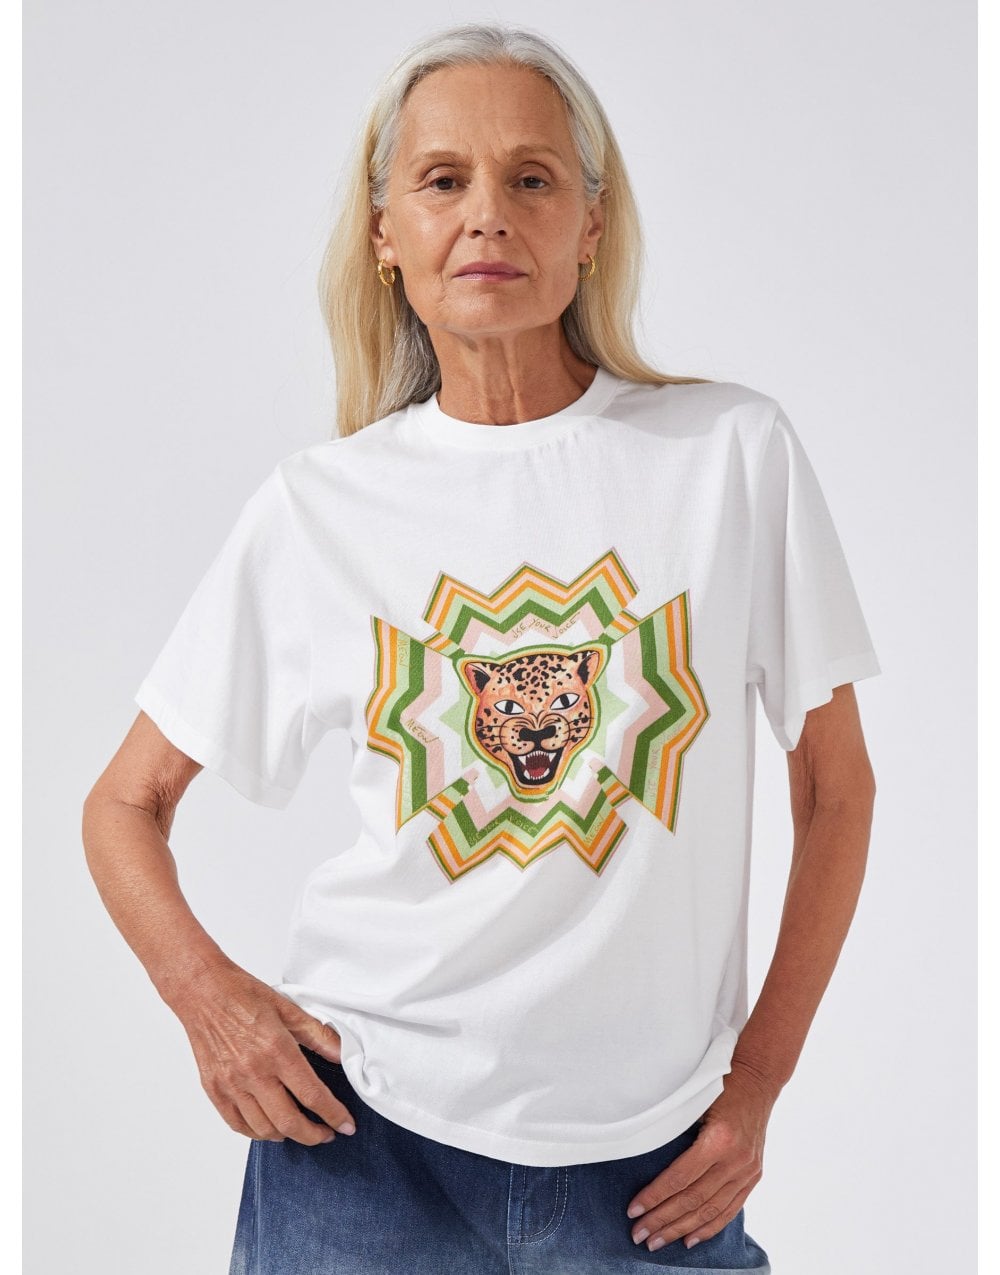 Hayley Menzies Hayley Menzies Psychedelic Leopard T-shirt Col: White Multi, Size: M